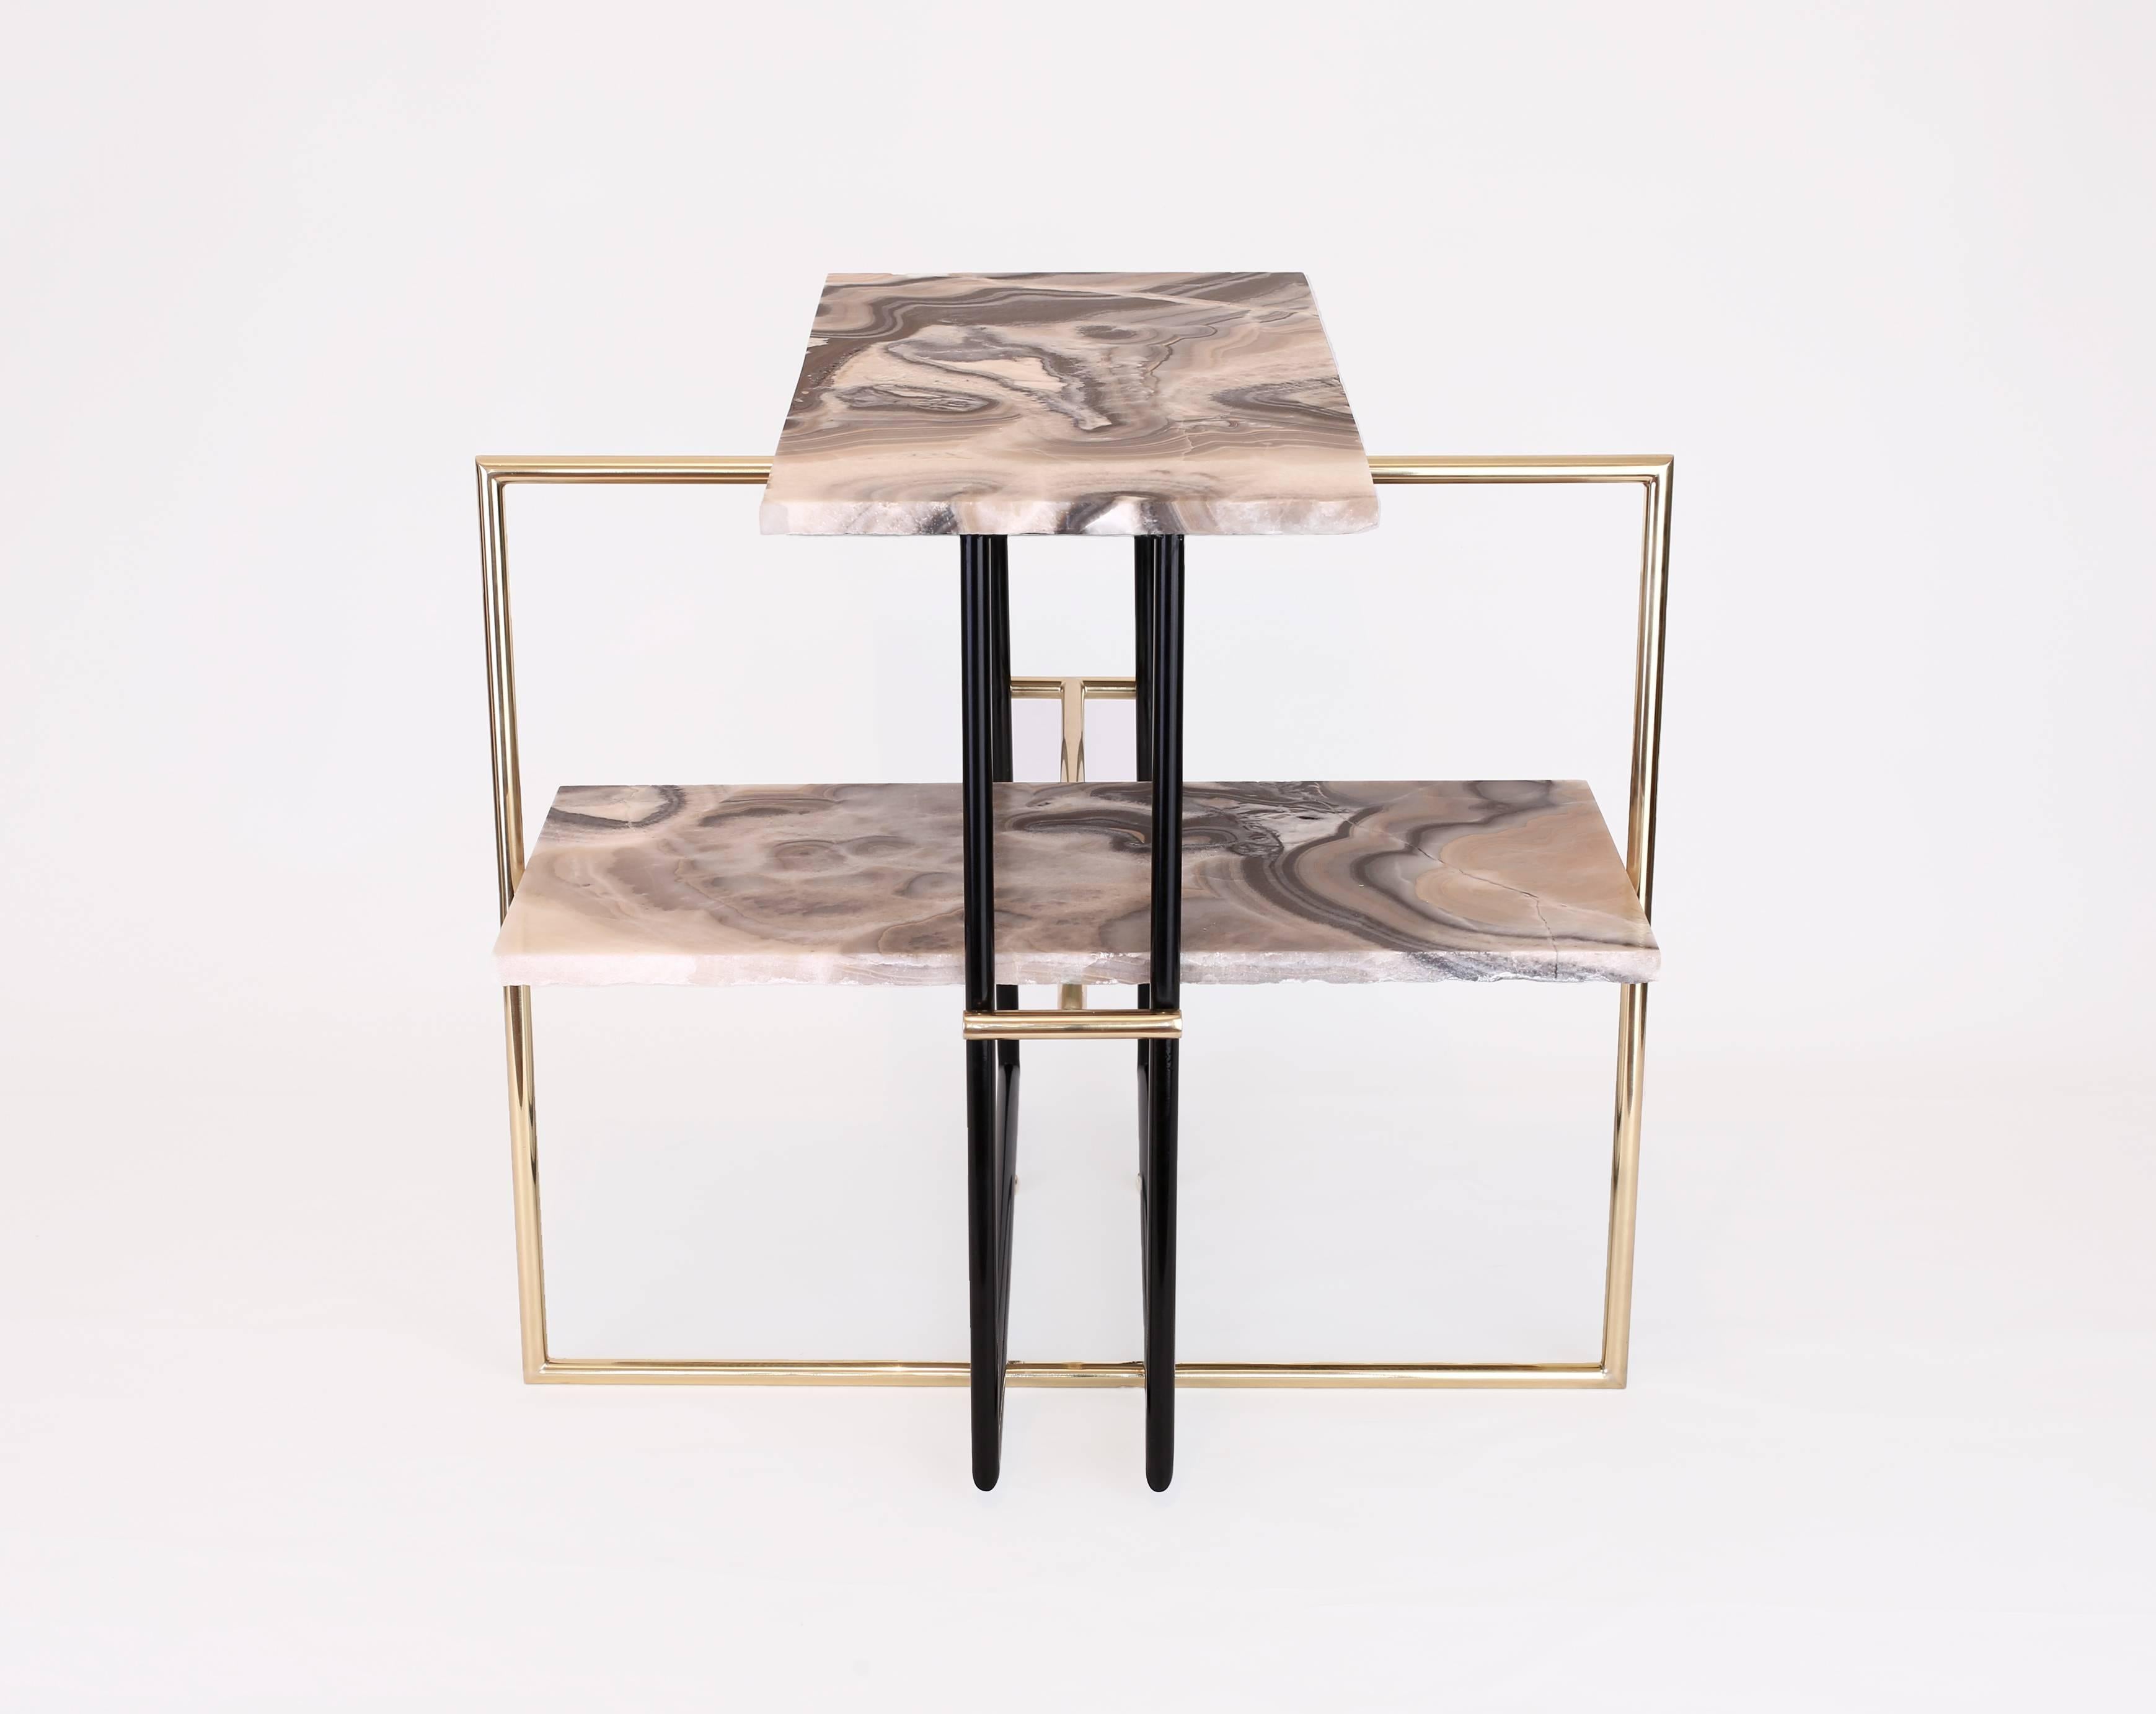 Hand-Carved Mexican Onyx Stone and Brass UÑA Side Coffee Table Design by Nomade Atelier For Sale